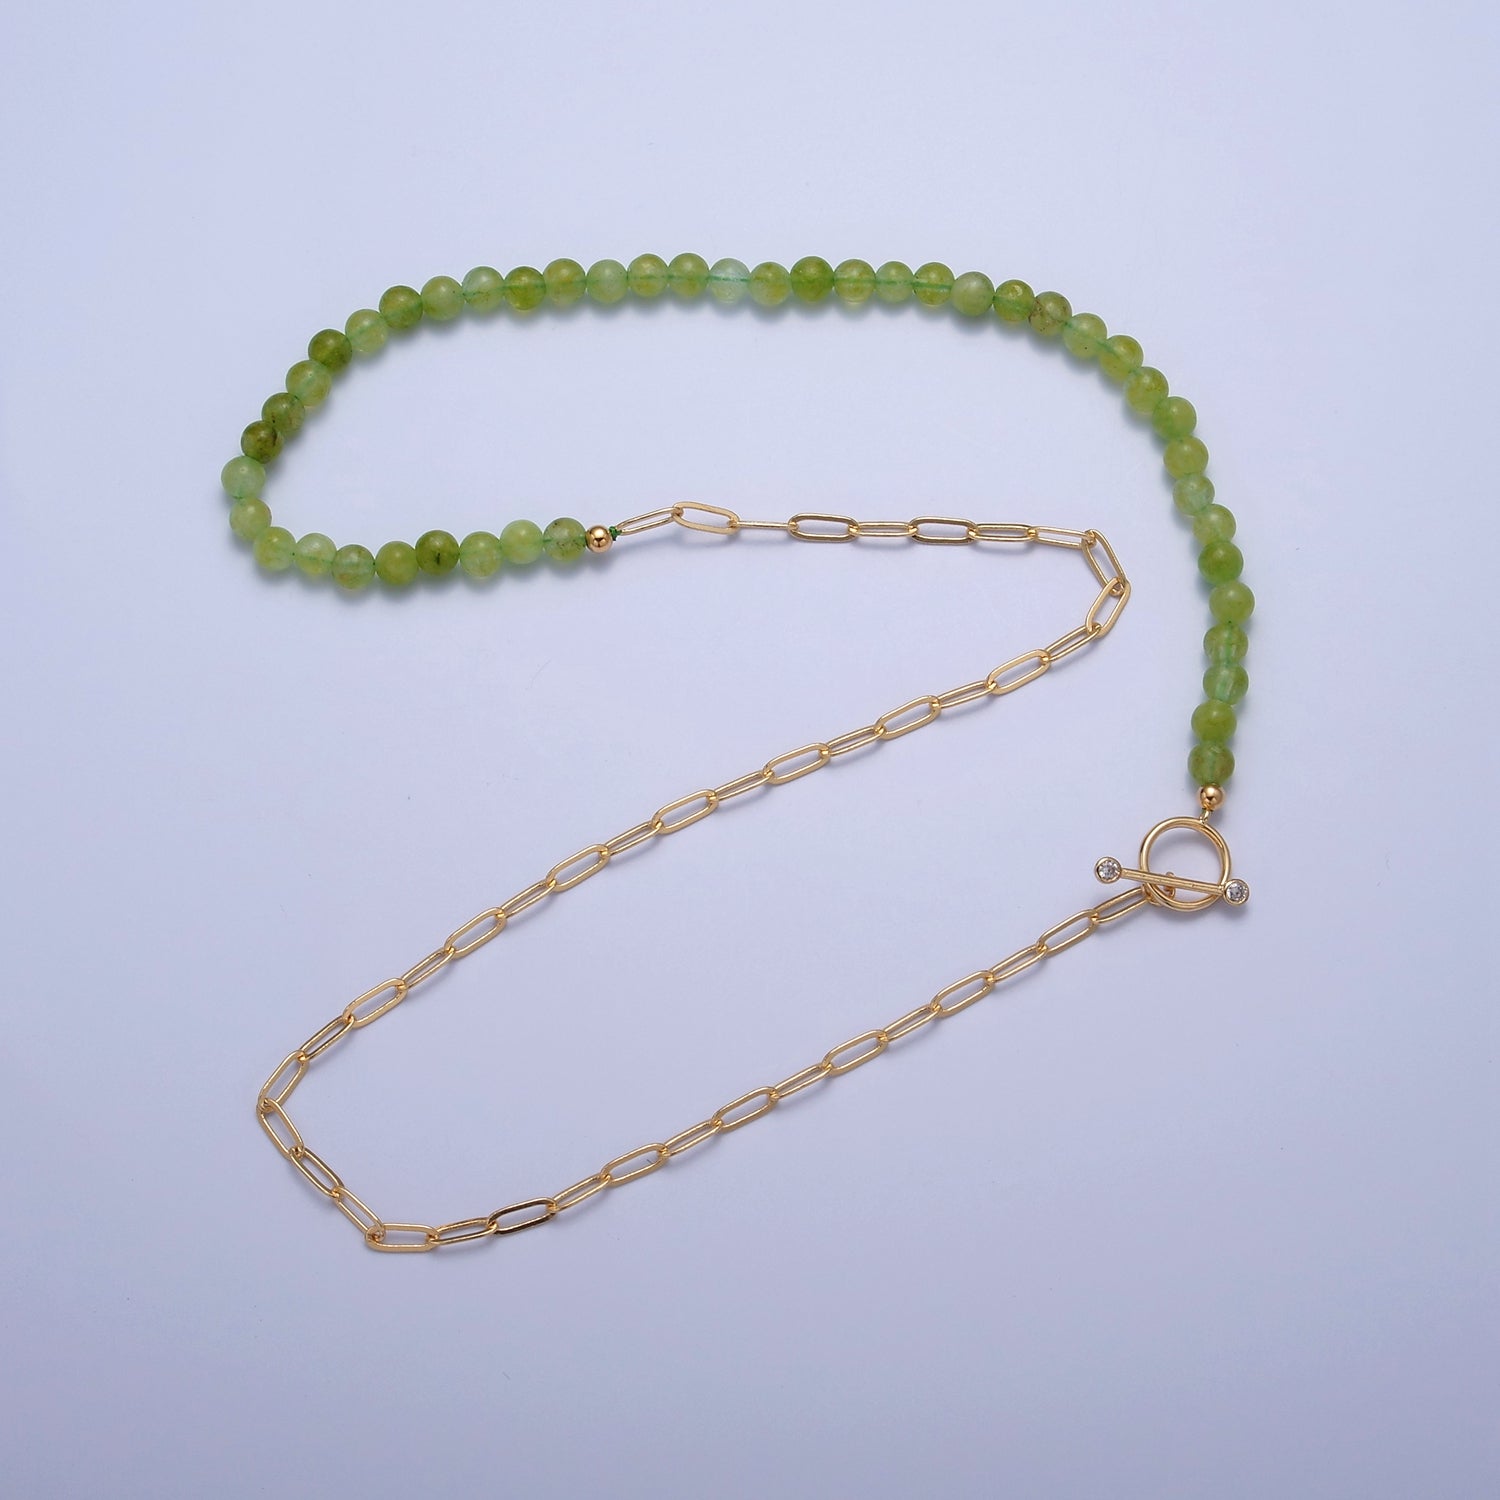 Dainty Half Bead Half Link Chain Necklace, 24k Gold Filled Paperclip Chain with Green Jade Necklace Toggle Clasp WA-960 - DLUXCA